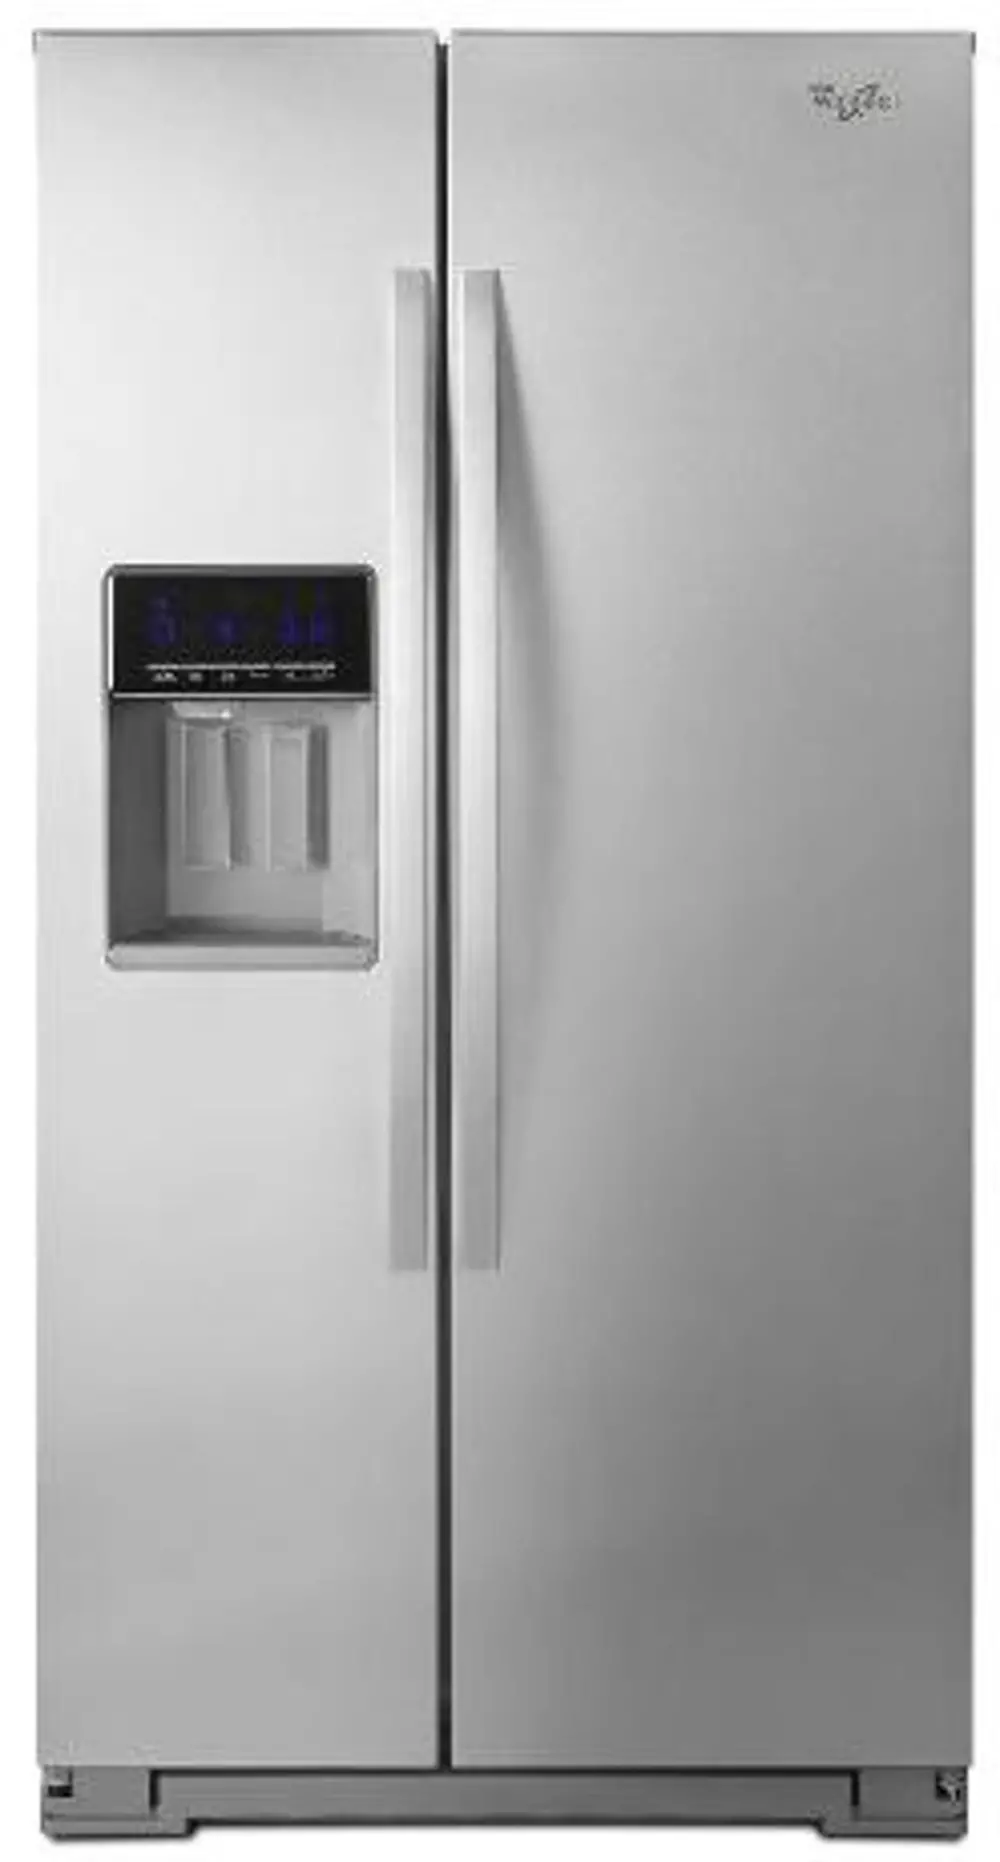 WRS571CIDM Whirlpool Side-by-Side Refrigerator - 36 Inch Counter Depth - Stainless Steel-1